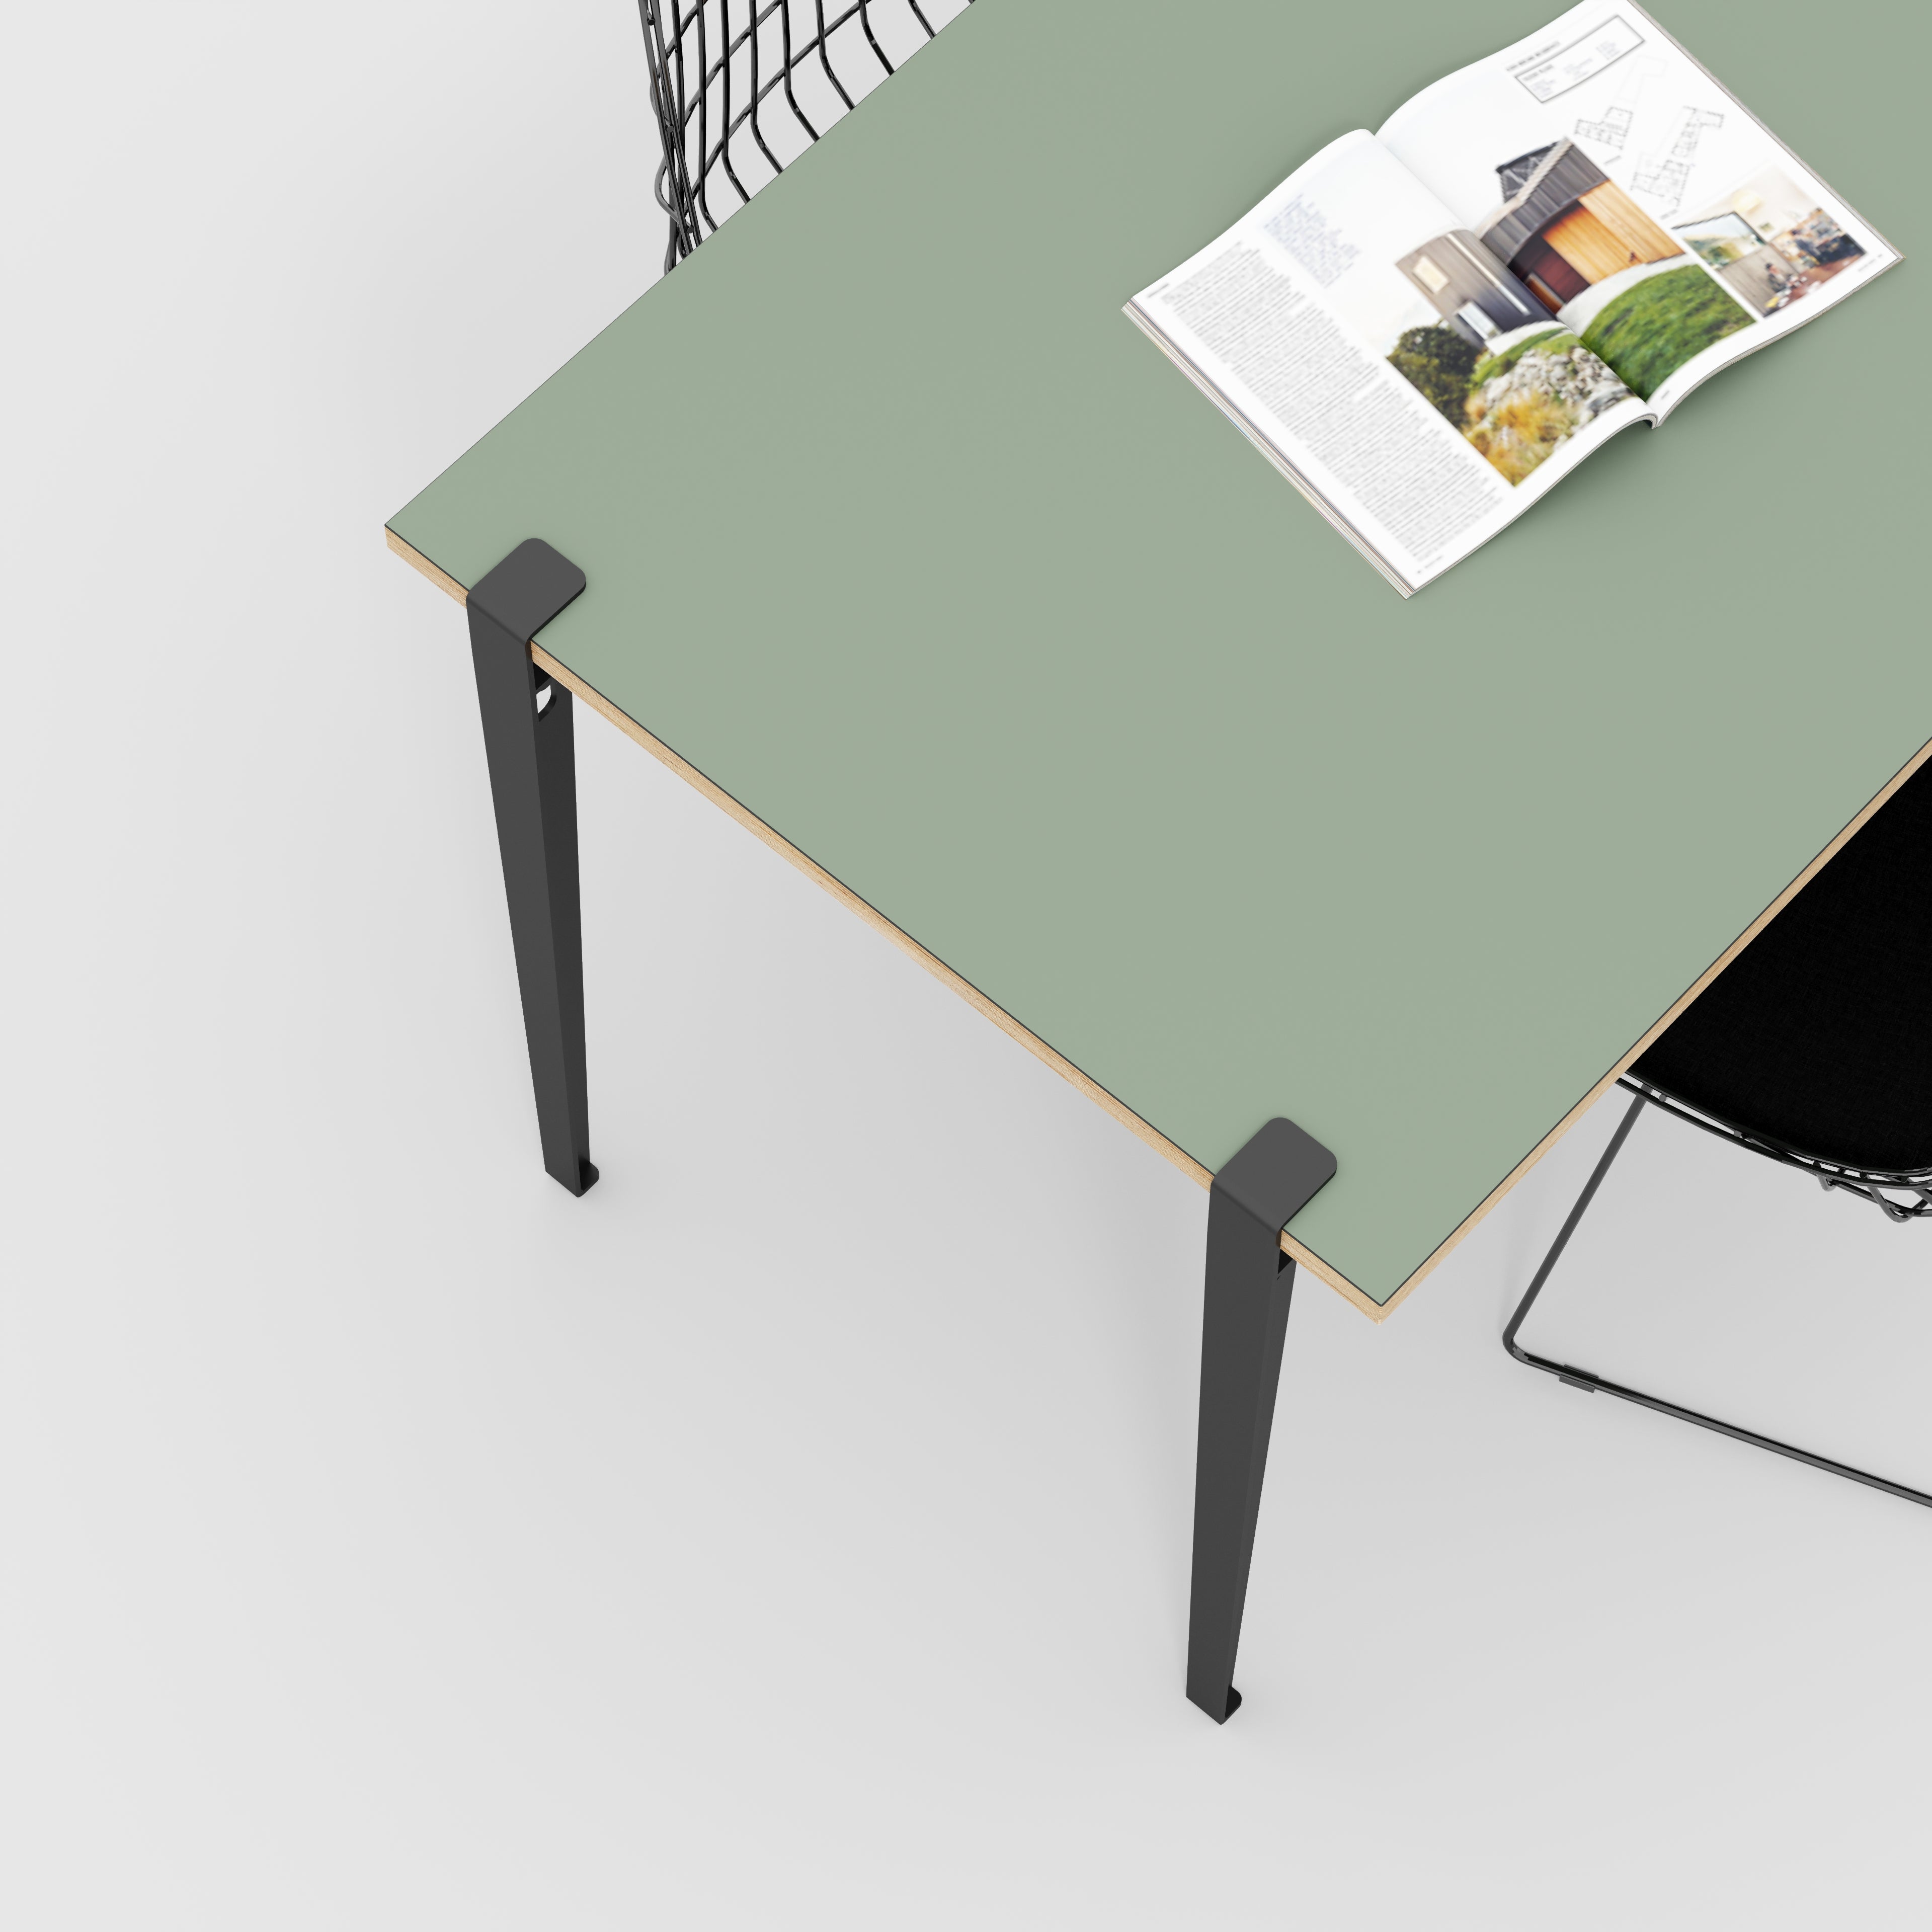 Wall Table with Black Tiptoe Legs and Brackets - Formica Green Slate - 1200(w) x 800(d) x 750(h)